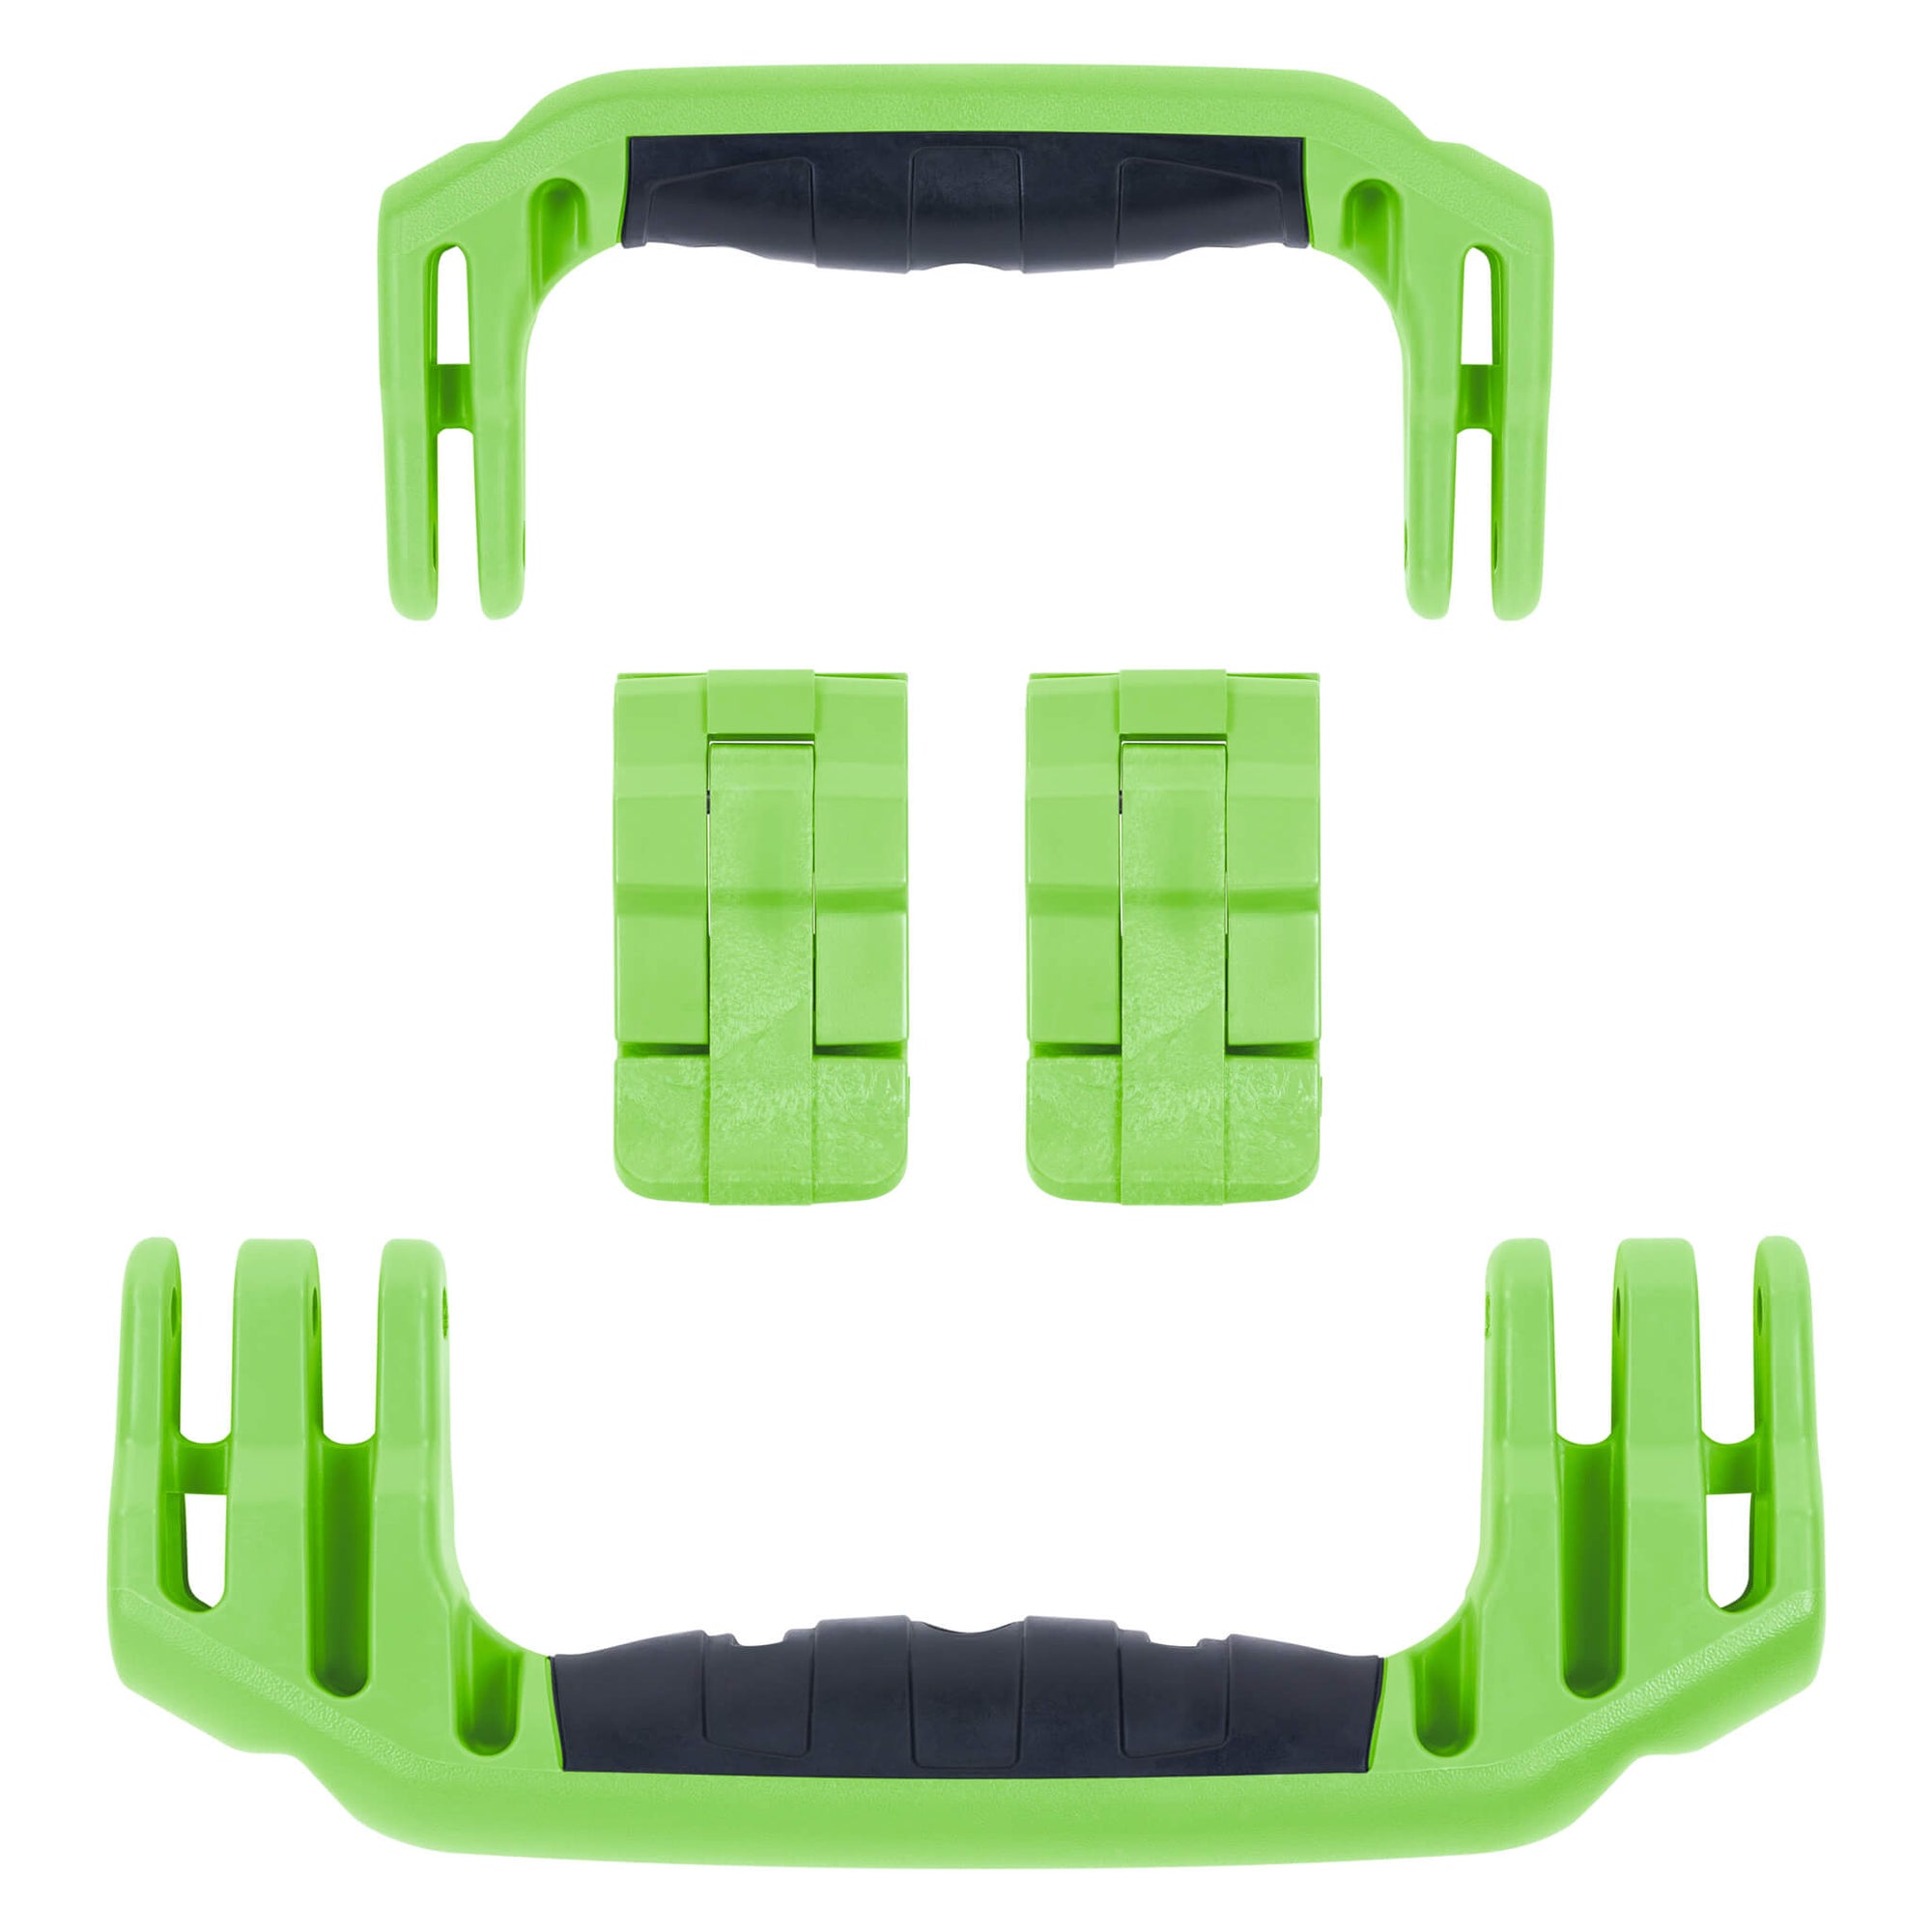 Pelican 1560 Replacement Handles & Latches, Lime Green (Set of 2 Handles, 2 Latches) ColorCase 